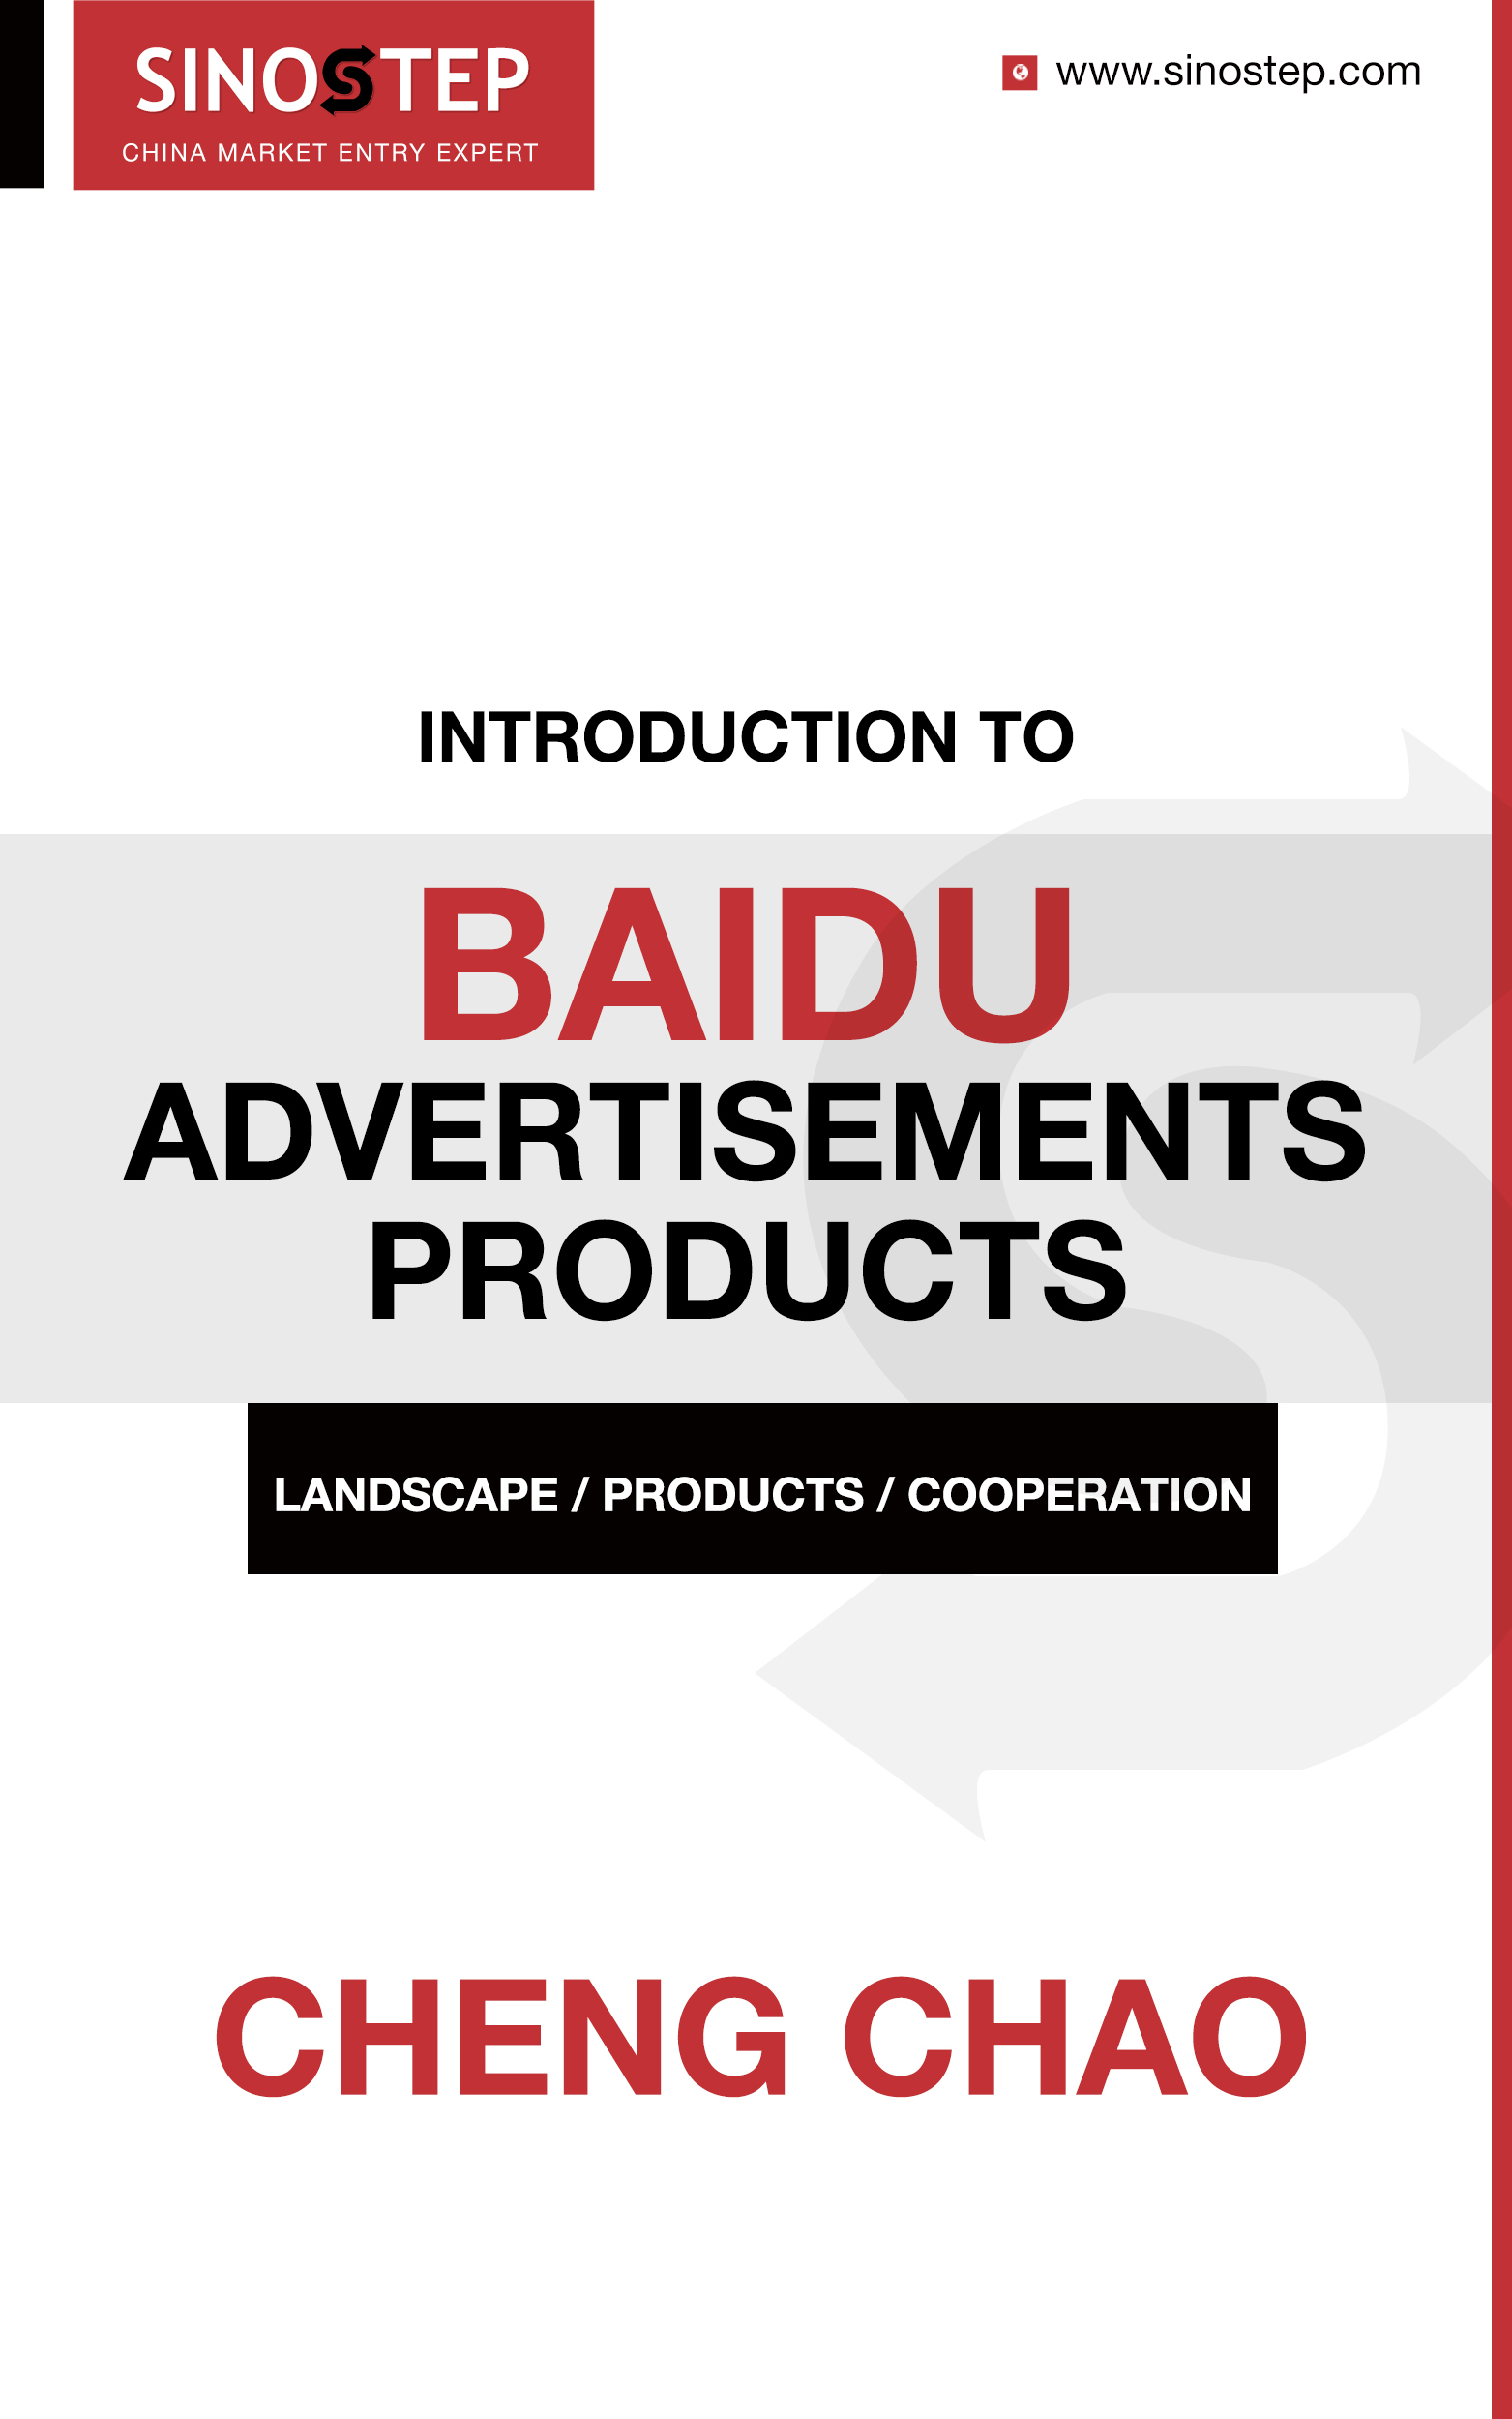 Introduction to Baidu Advertisements Products (PDF)